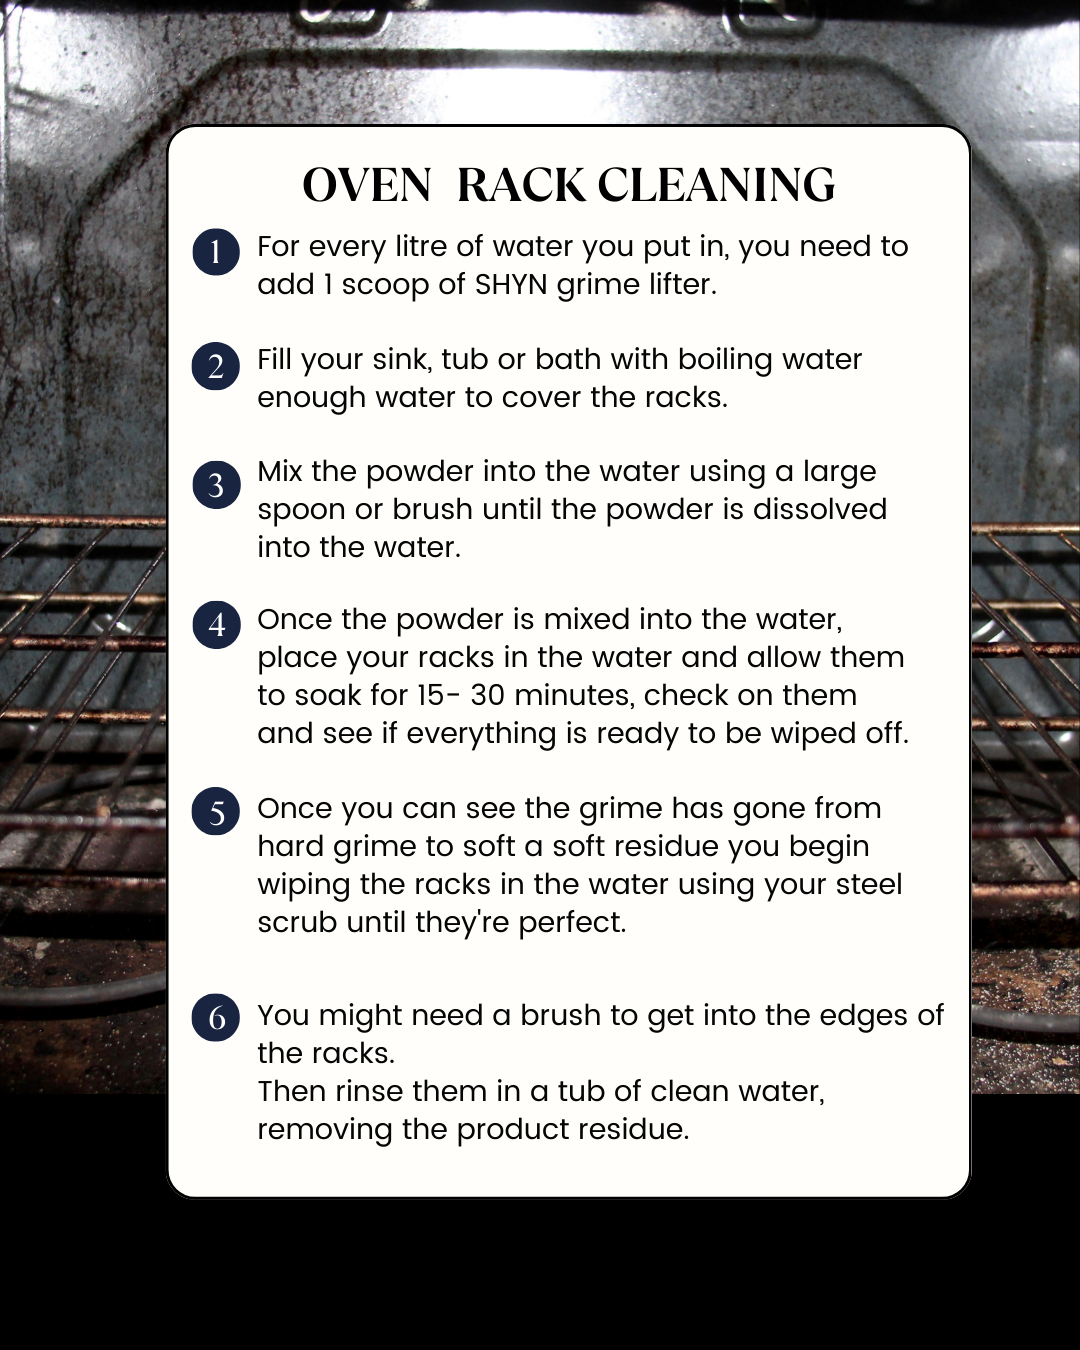 Dirty oven and oven racks WITH HOW TO INSTRUCTIONS 